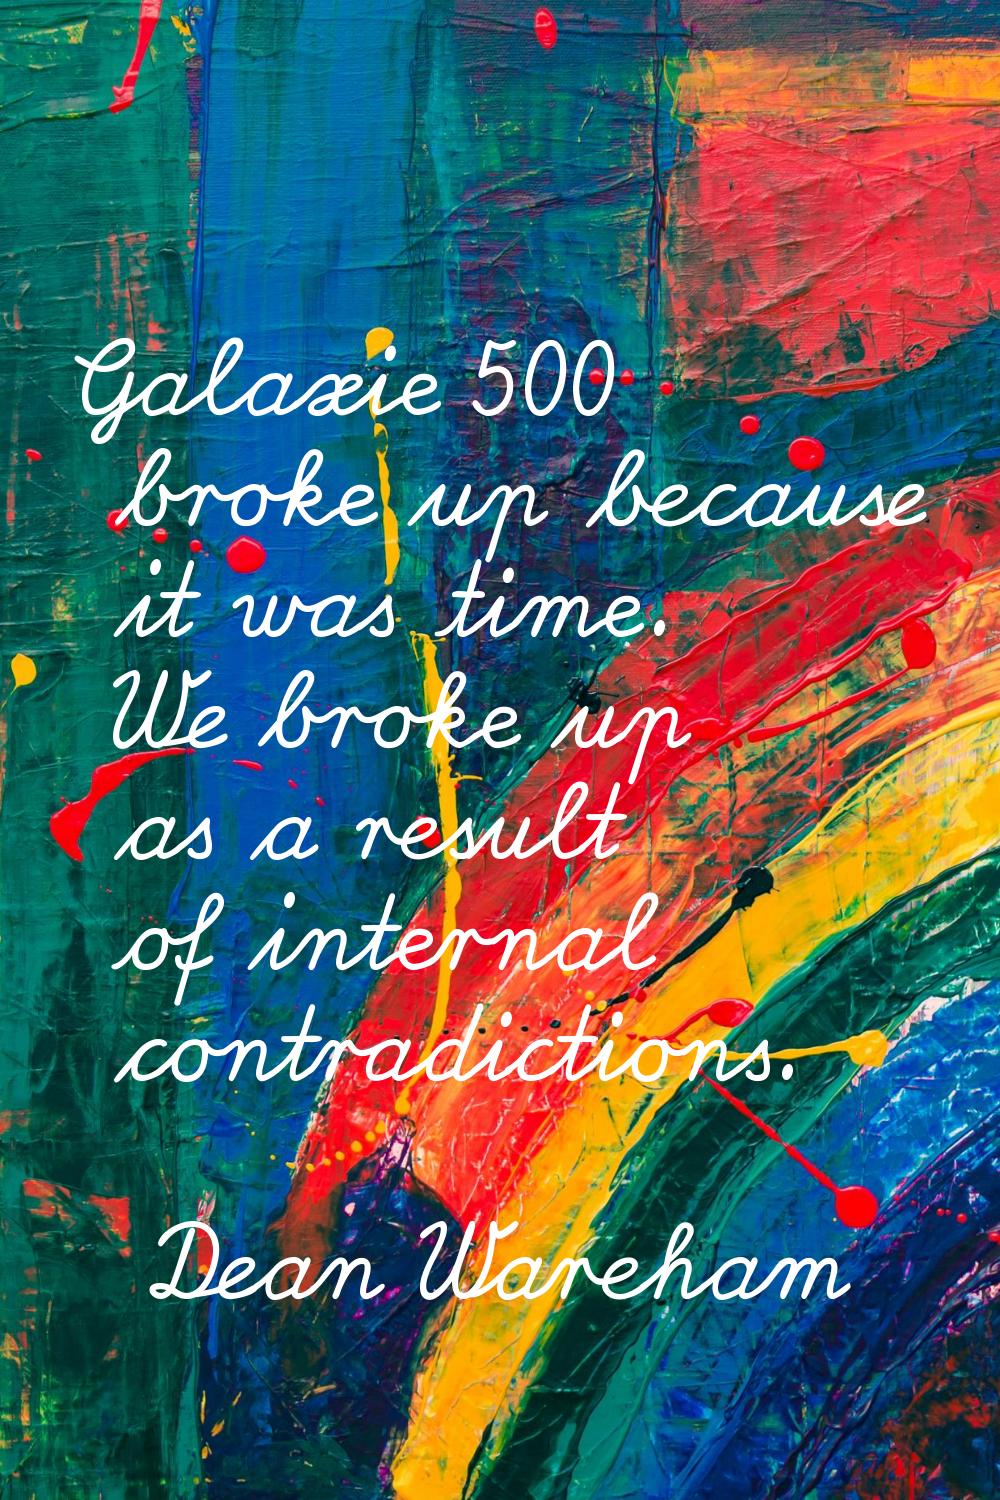 Galaxie 500 broke up because it was time. We broke up as a result of internal contradictions.